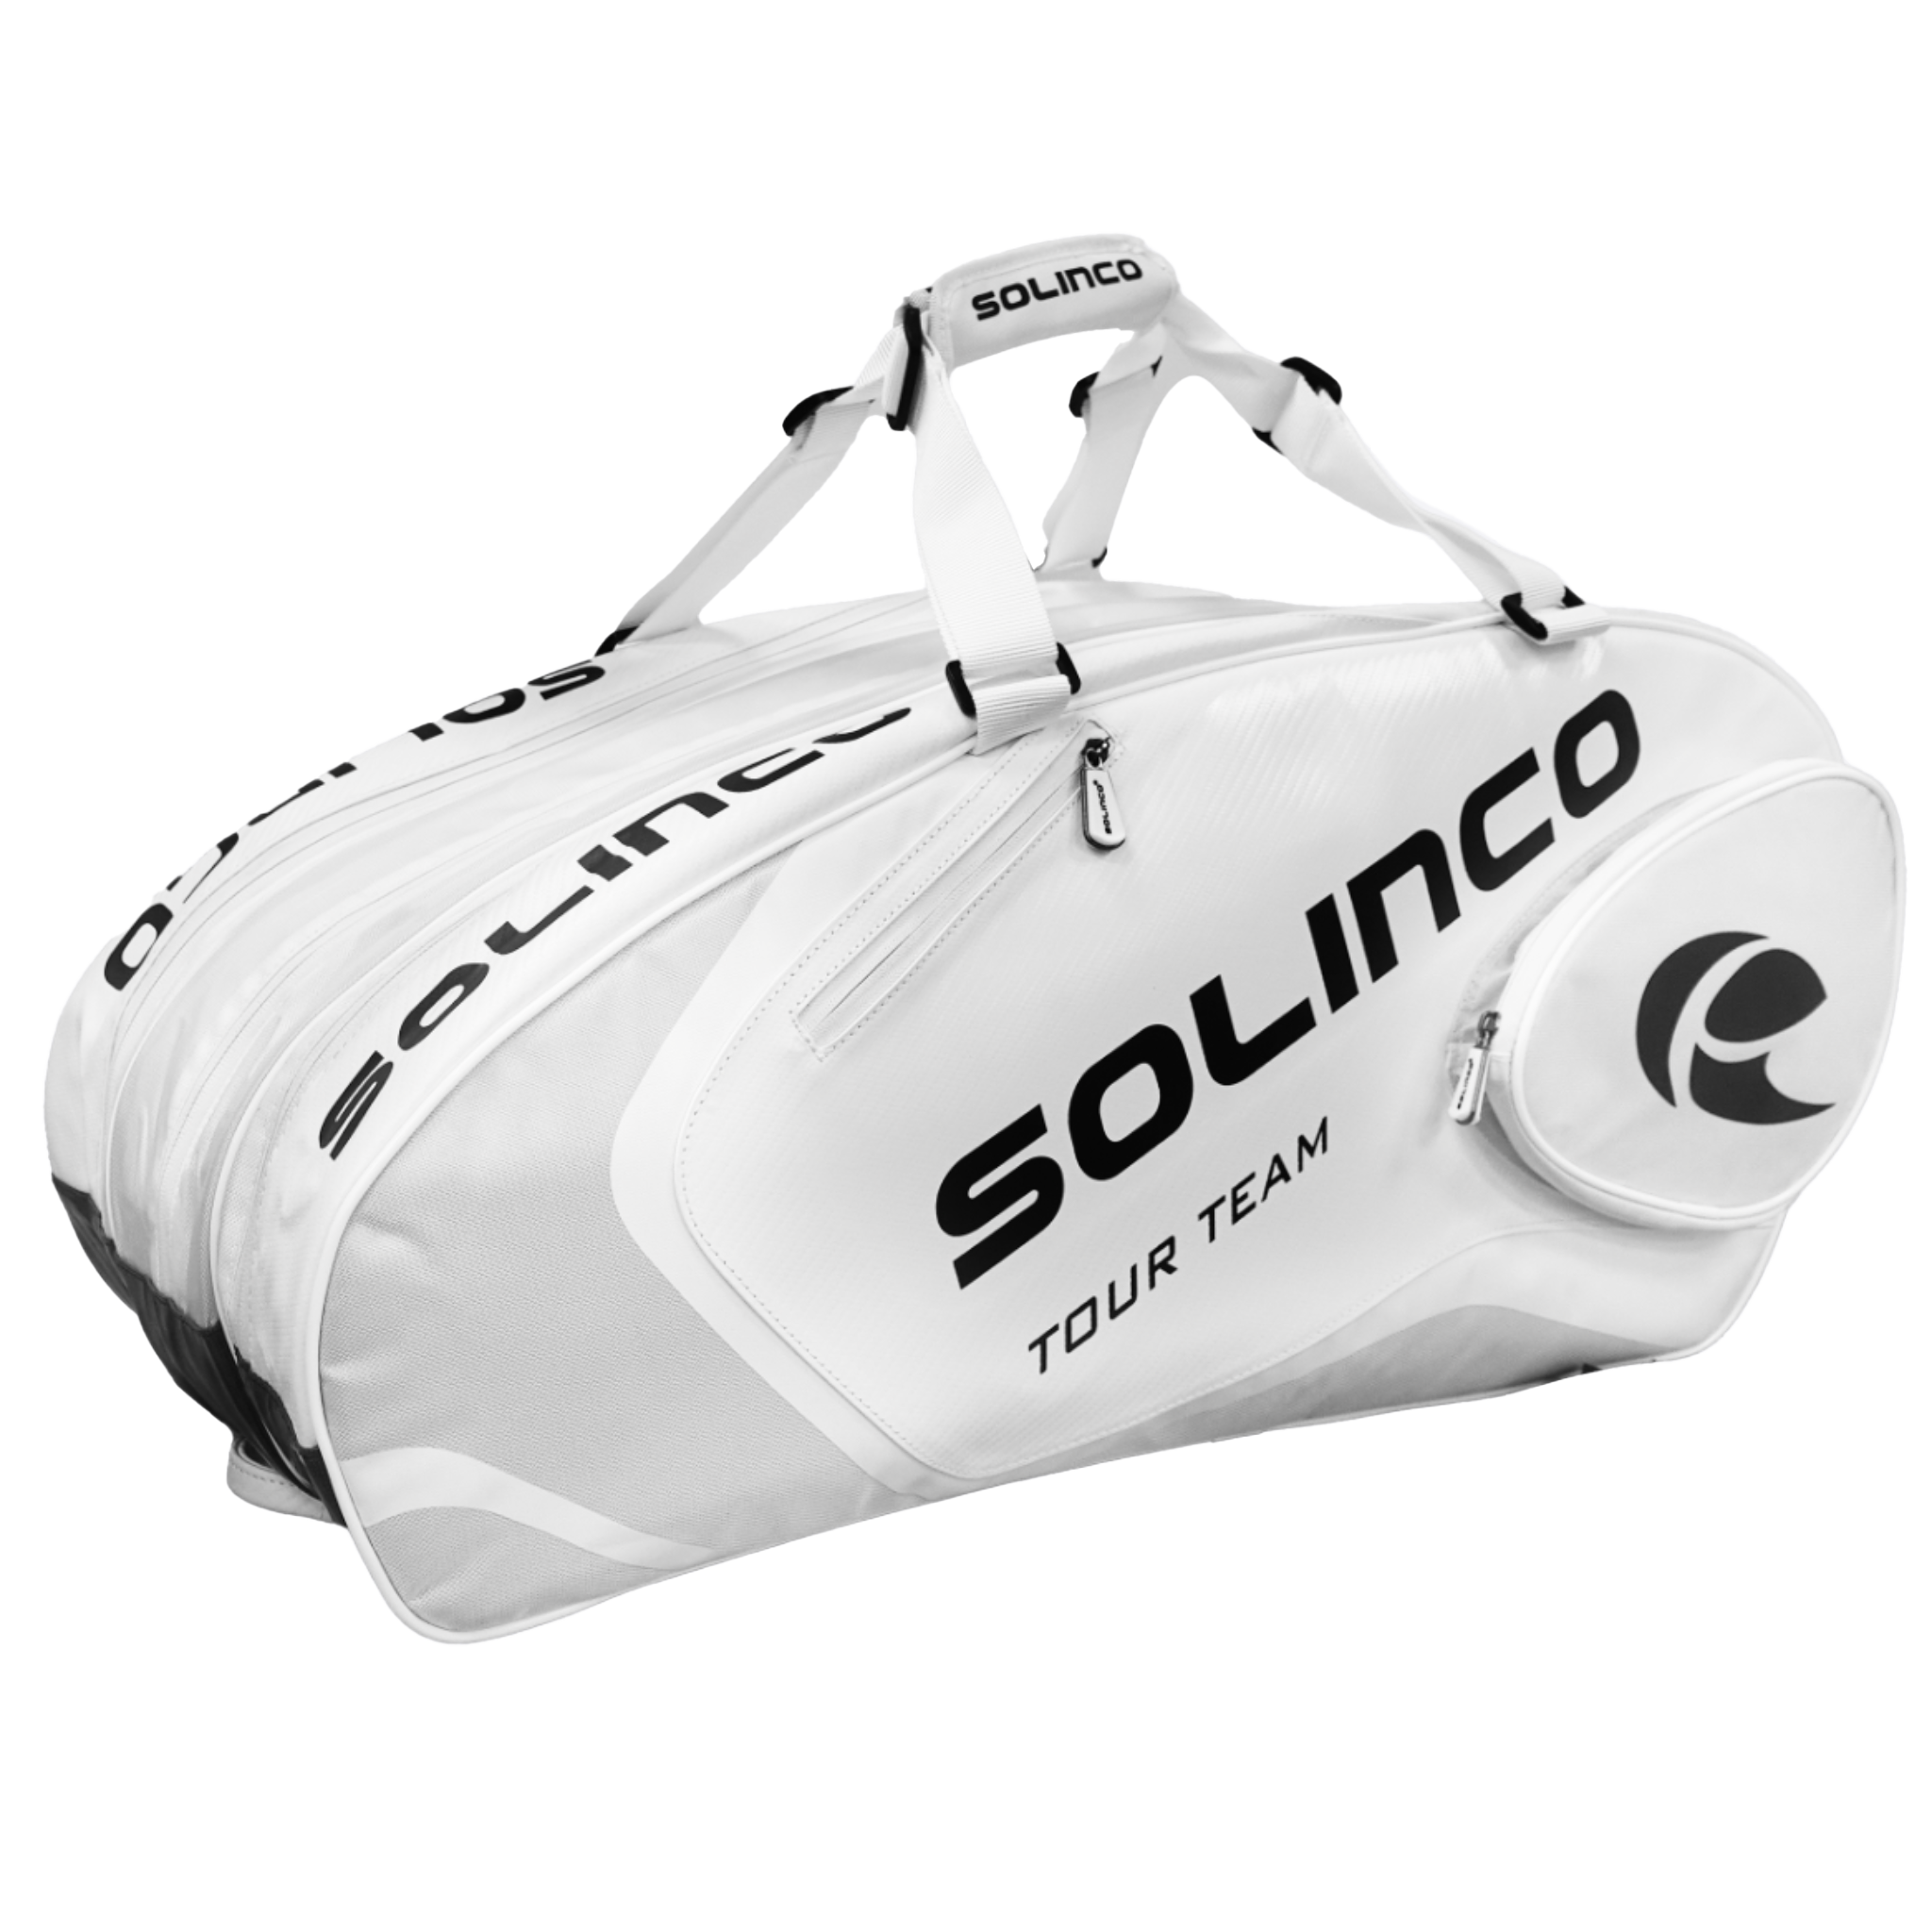 Solinco 15-Pack Tour Bag - Whiteout